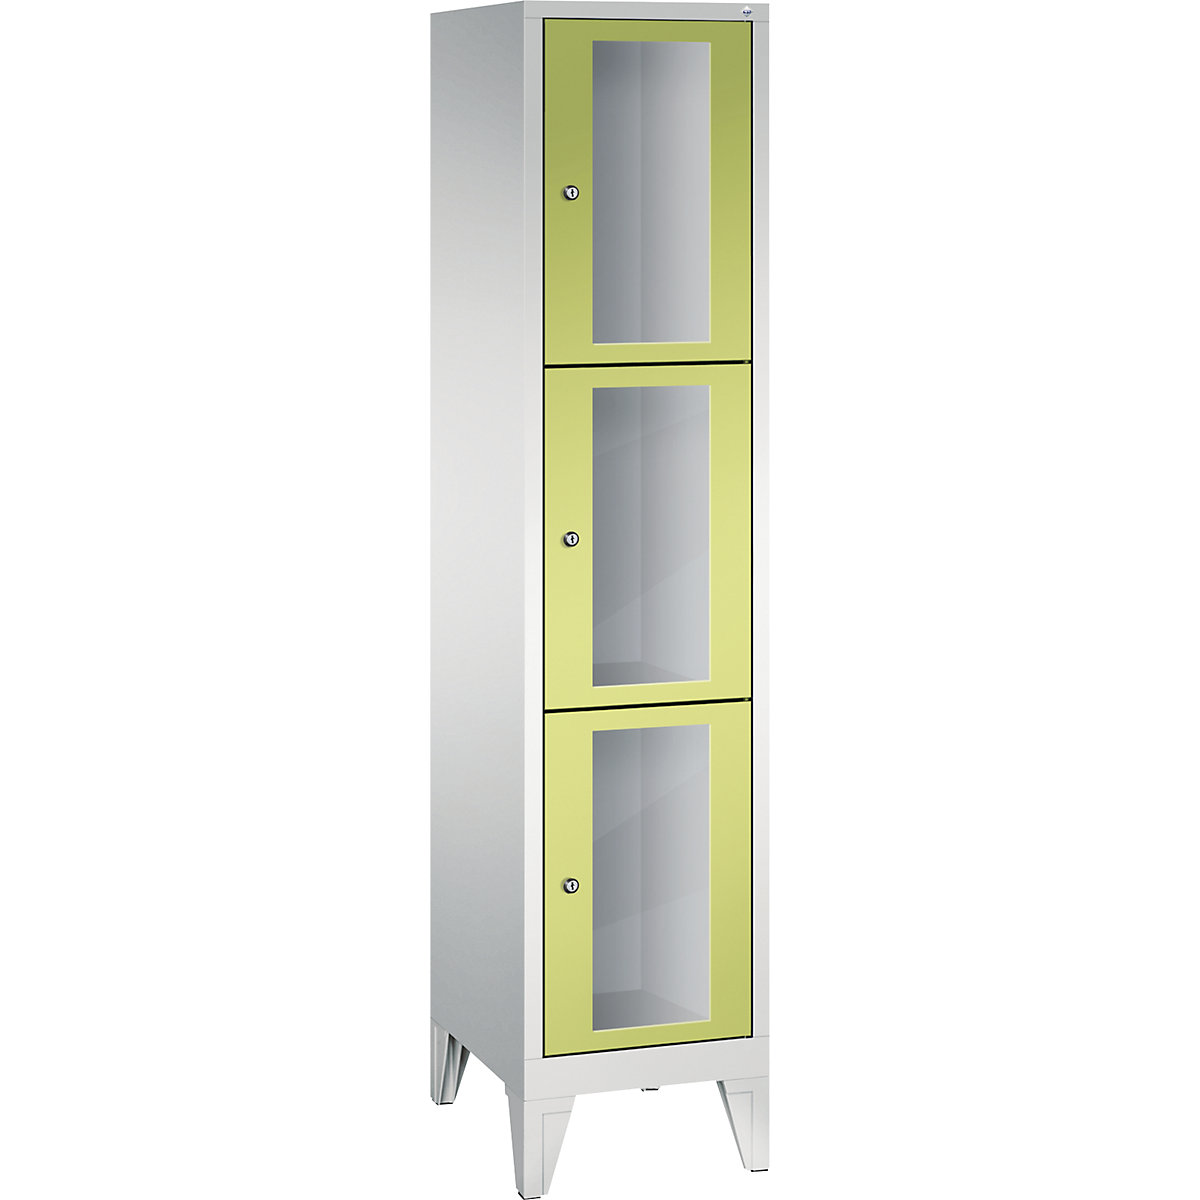 CLASSIC locker unit, compartment height 510 mm, with feet – C+P, 3 compartments, width 420 mm, viridian green door-4